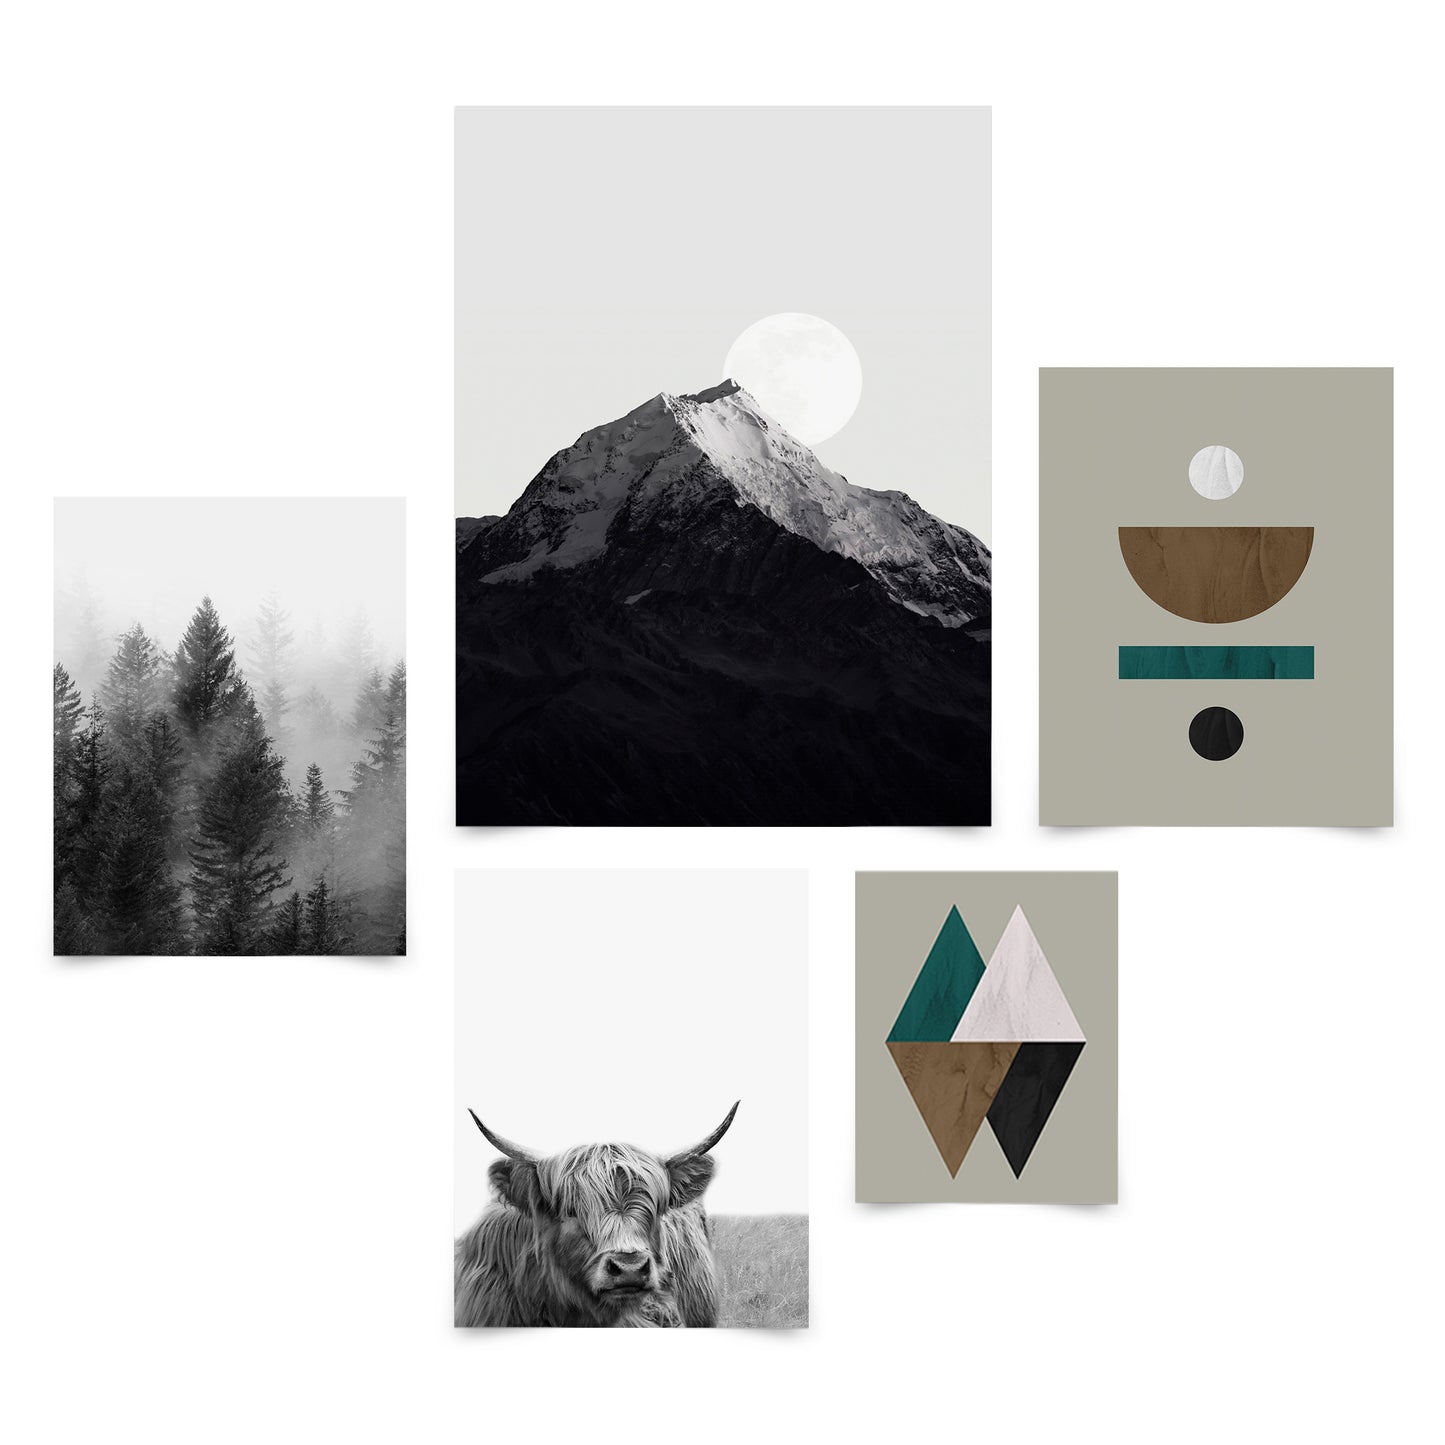 5 Piece Poster Gallery Wall Art Set - Black & White Landscape & Earth Tones Abstract Nature - Print